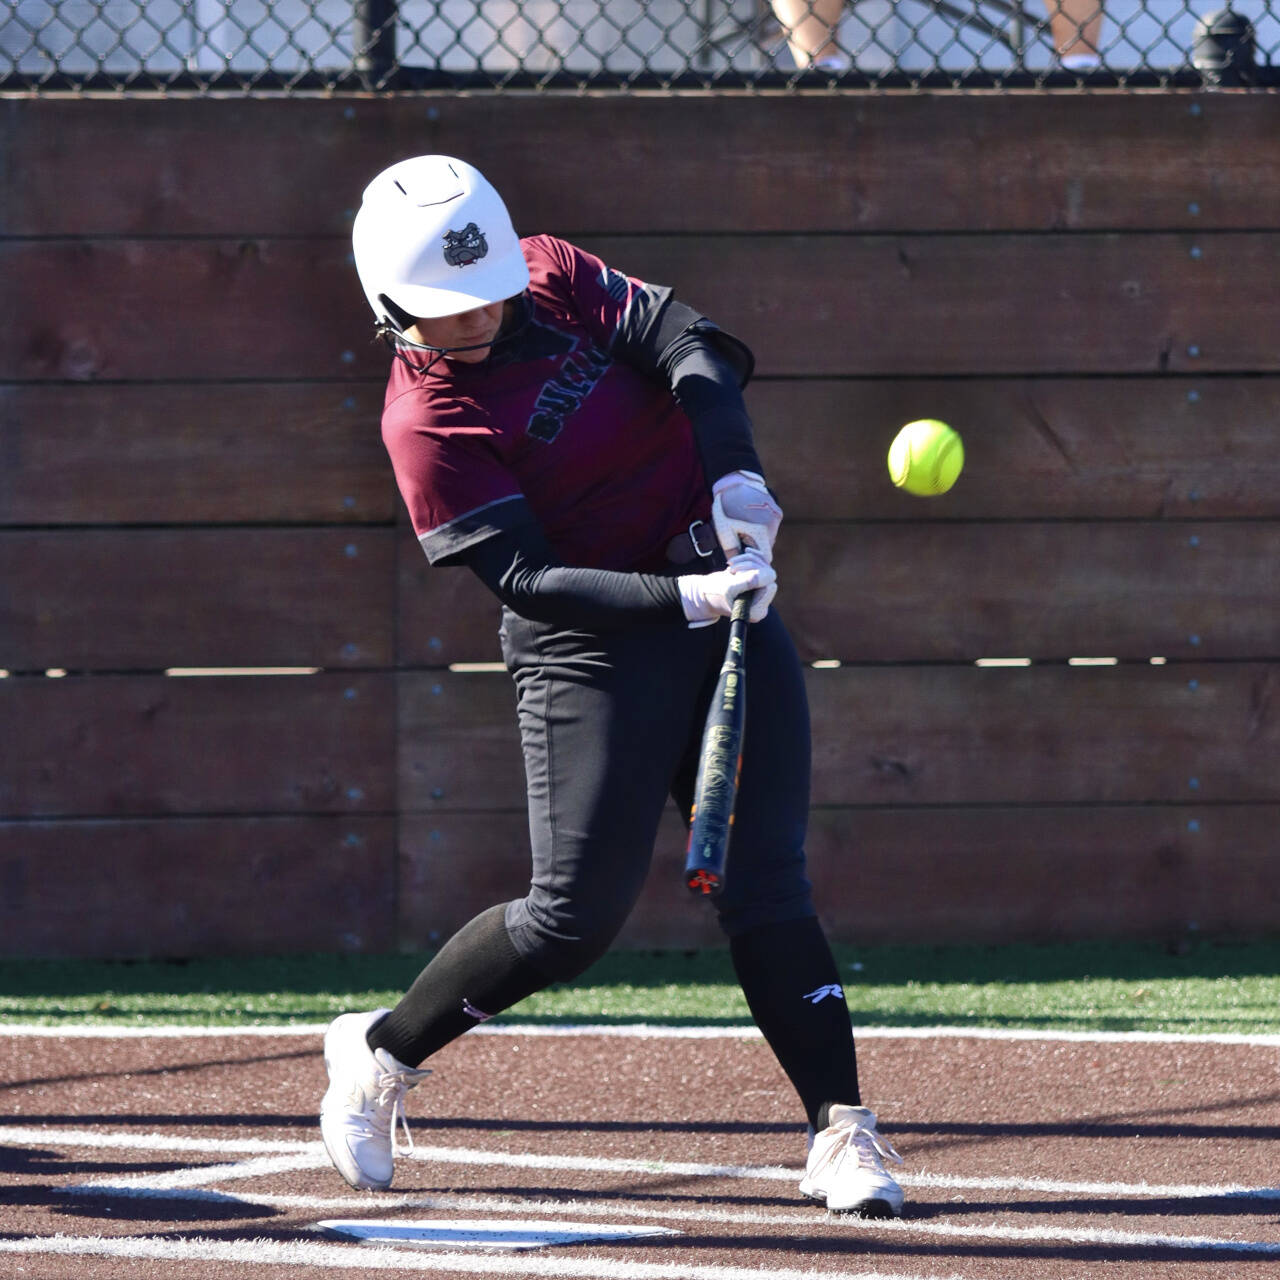 PHOTO BY HAILEY BLANCAS Montesano’s Ali Parkin belts a home run during a 9-5 loss to Battle Ground on Saturday at Auburn Riverside High School.